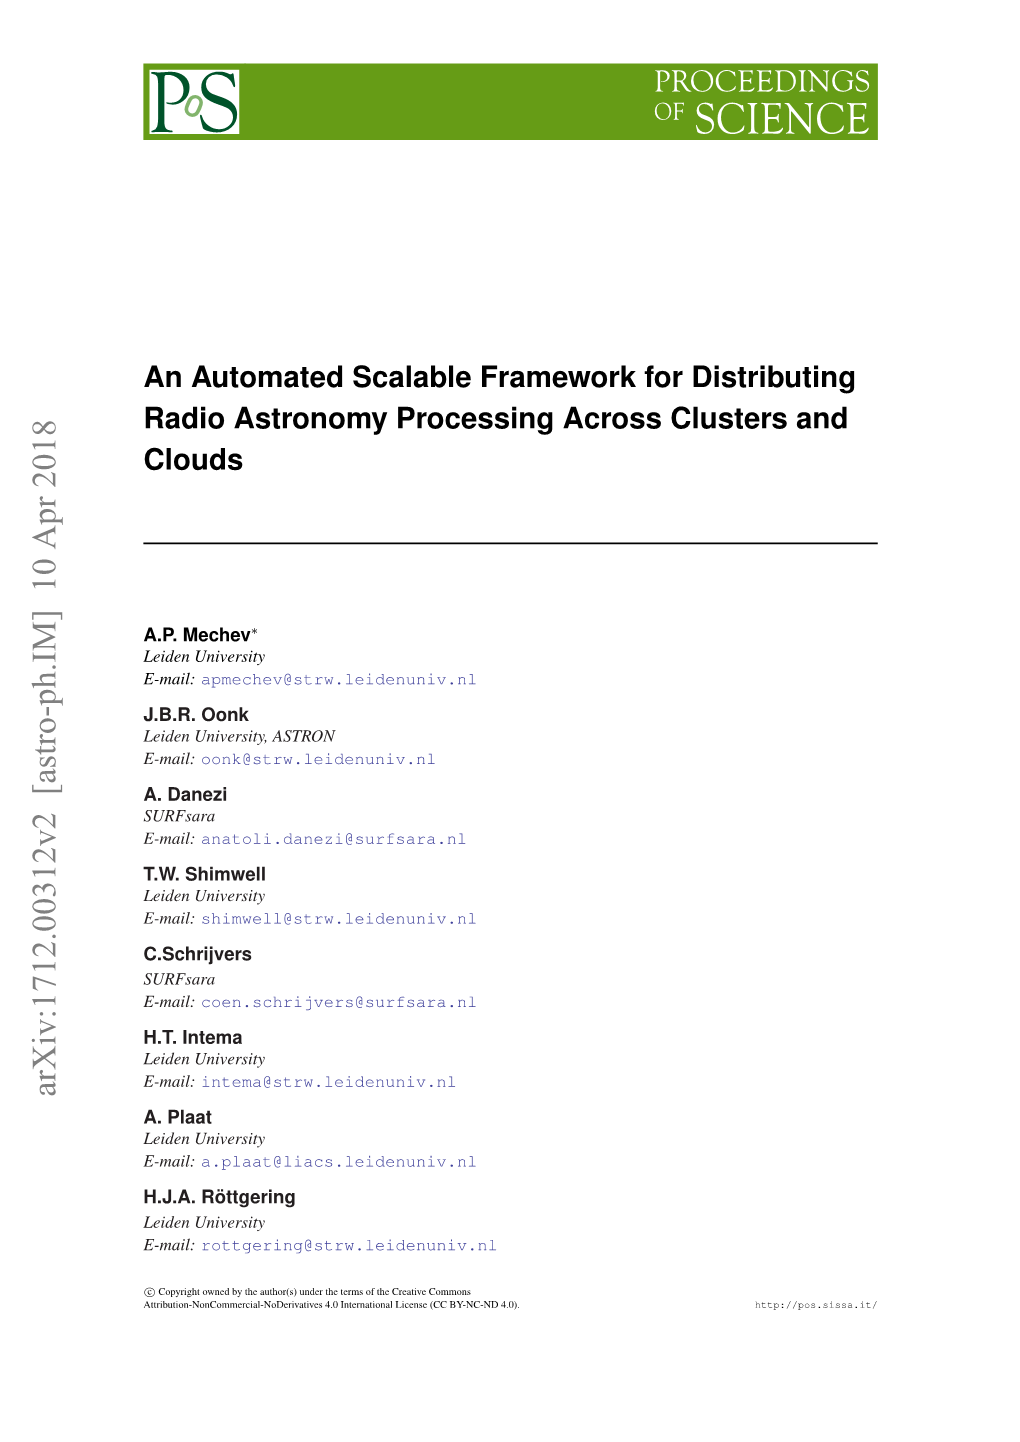 An Automated Scalable Framework for Distributing Radio Astronomy Processing Across Clusters and Clouds